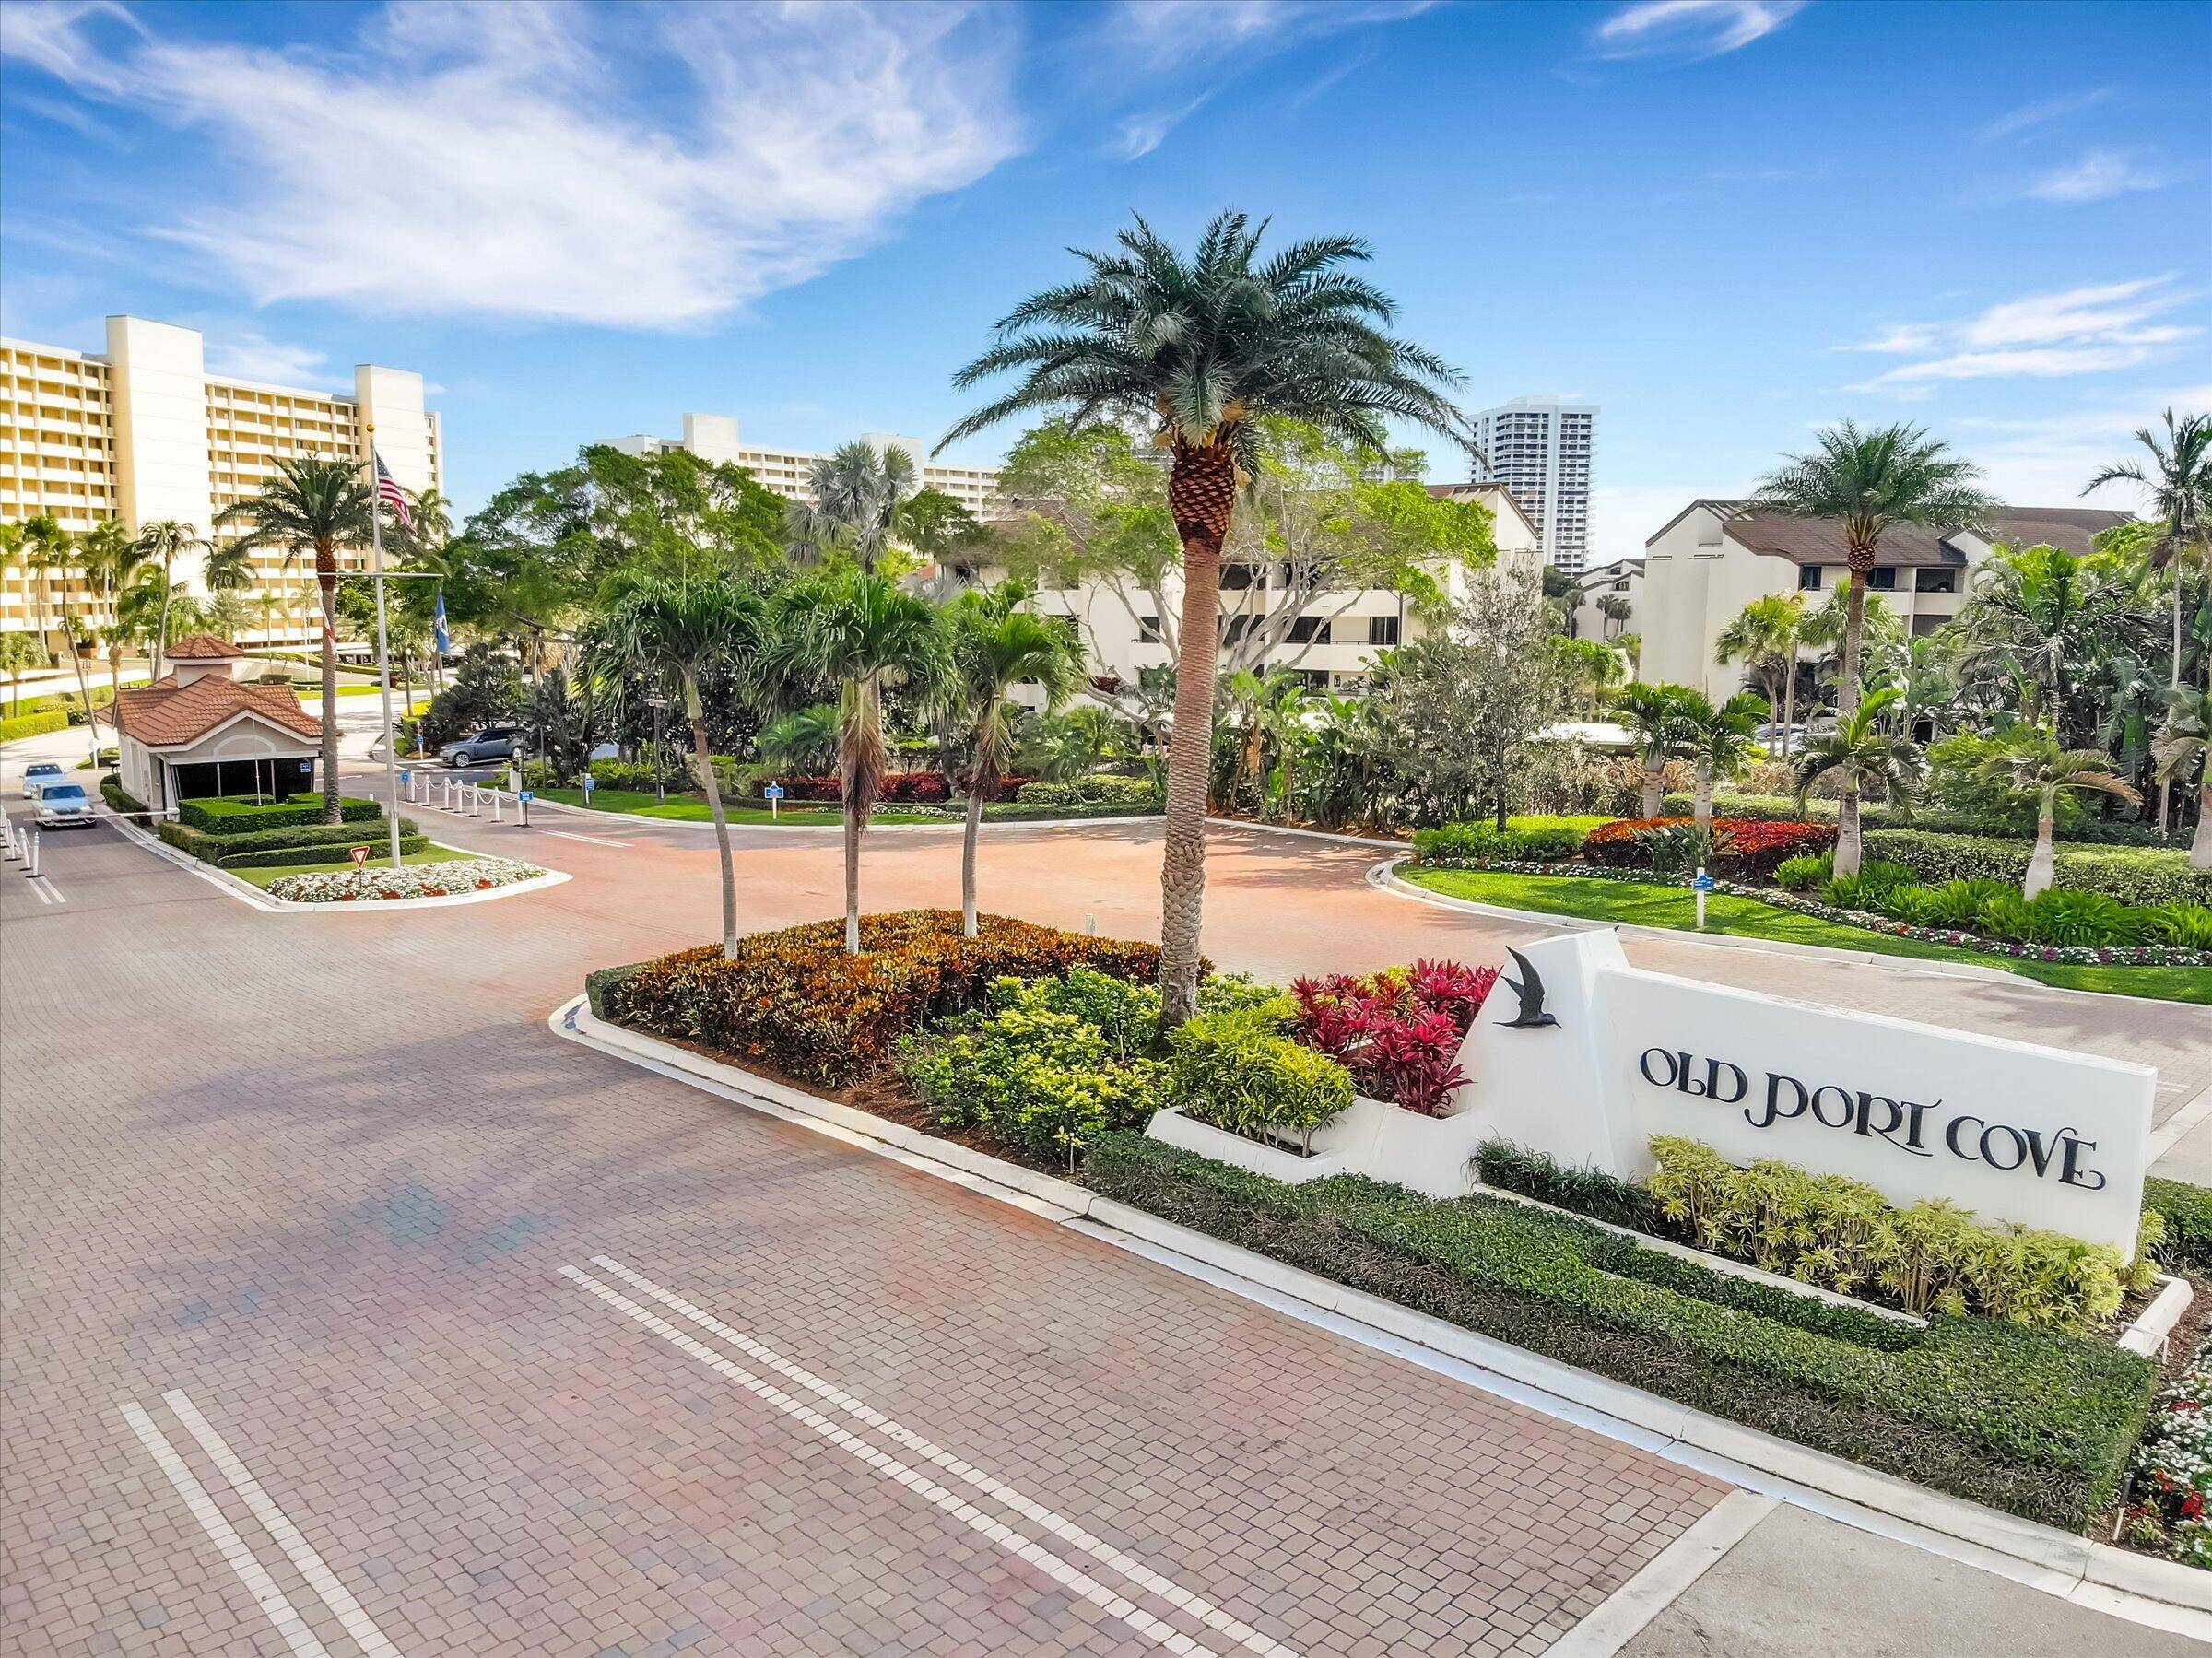 Discover the epitome of luxury living in the highly desirable condominium community of Old Port Cove.